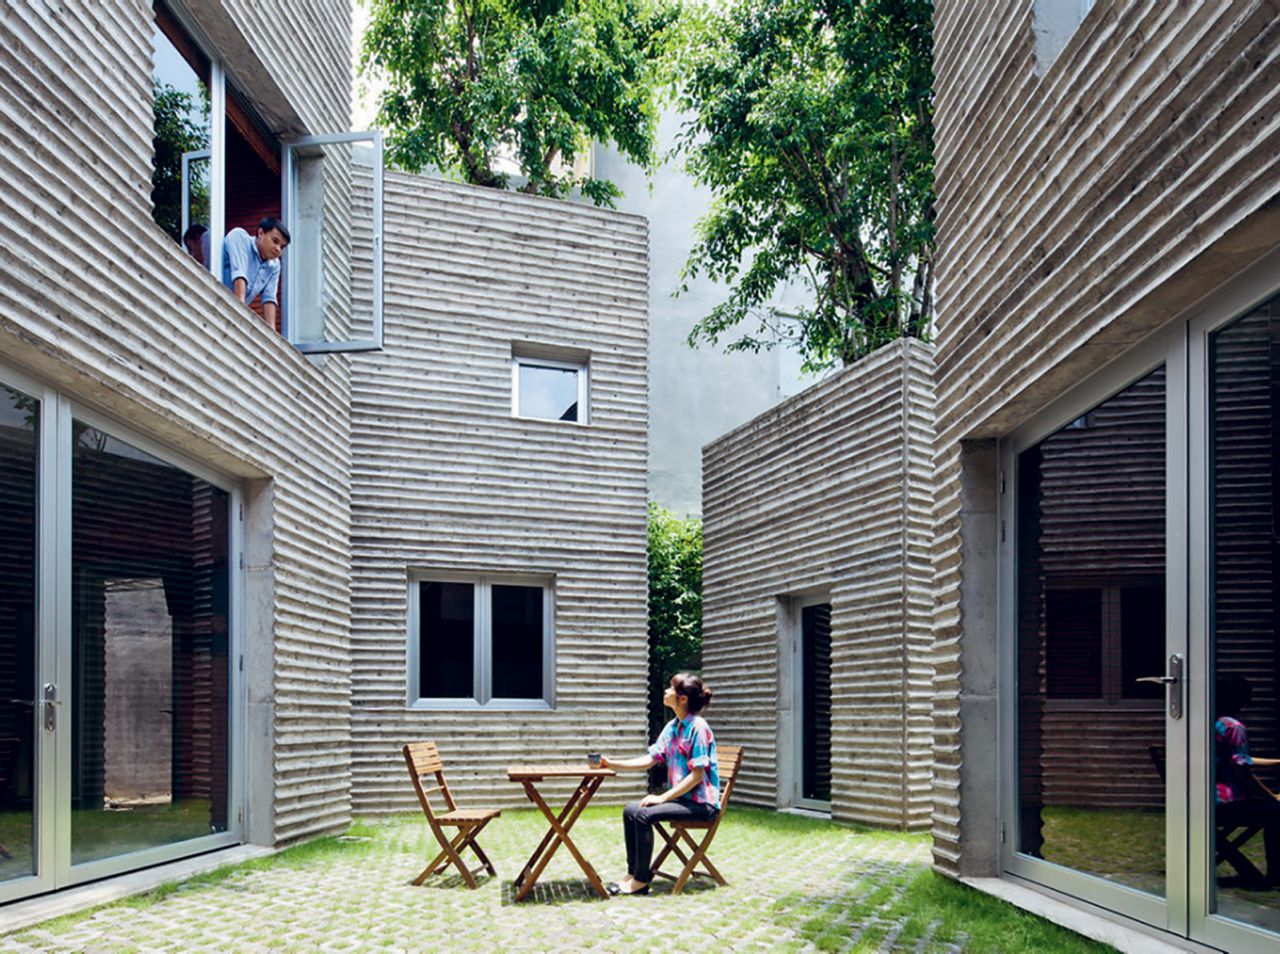 <strong>House for Trees, Ho Chi Minh, Vietnam, Vo Trong Nghia Architects (2014) --</strong> Designed to fit into the dense urban living of Vietnam's largest city, these homes have turned their deep flat roofs into giant containers for flora. "I just love this idea of having a house that is essentially like a massive plant pot," says Topham. Their composition creates internal courtyards, while the green roofs acts as a filter for the city's aerial pollutants. "The planting has to come first," he adds, "rather than doing it as an afterthought."